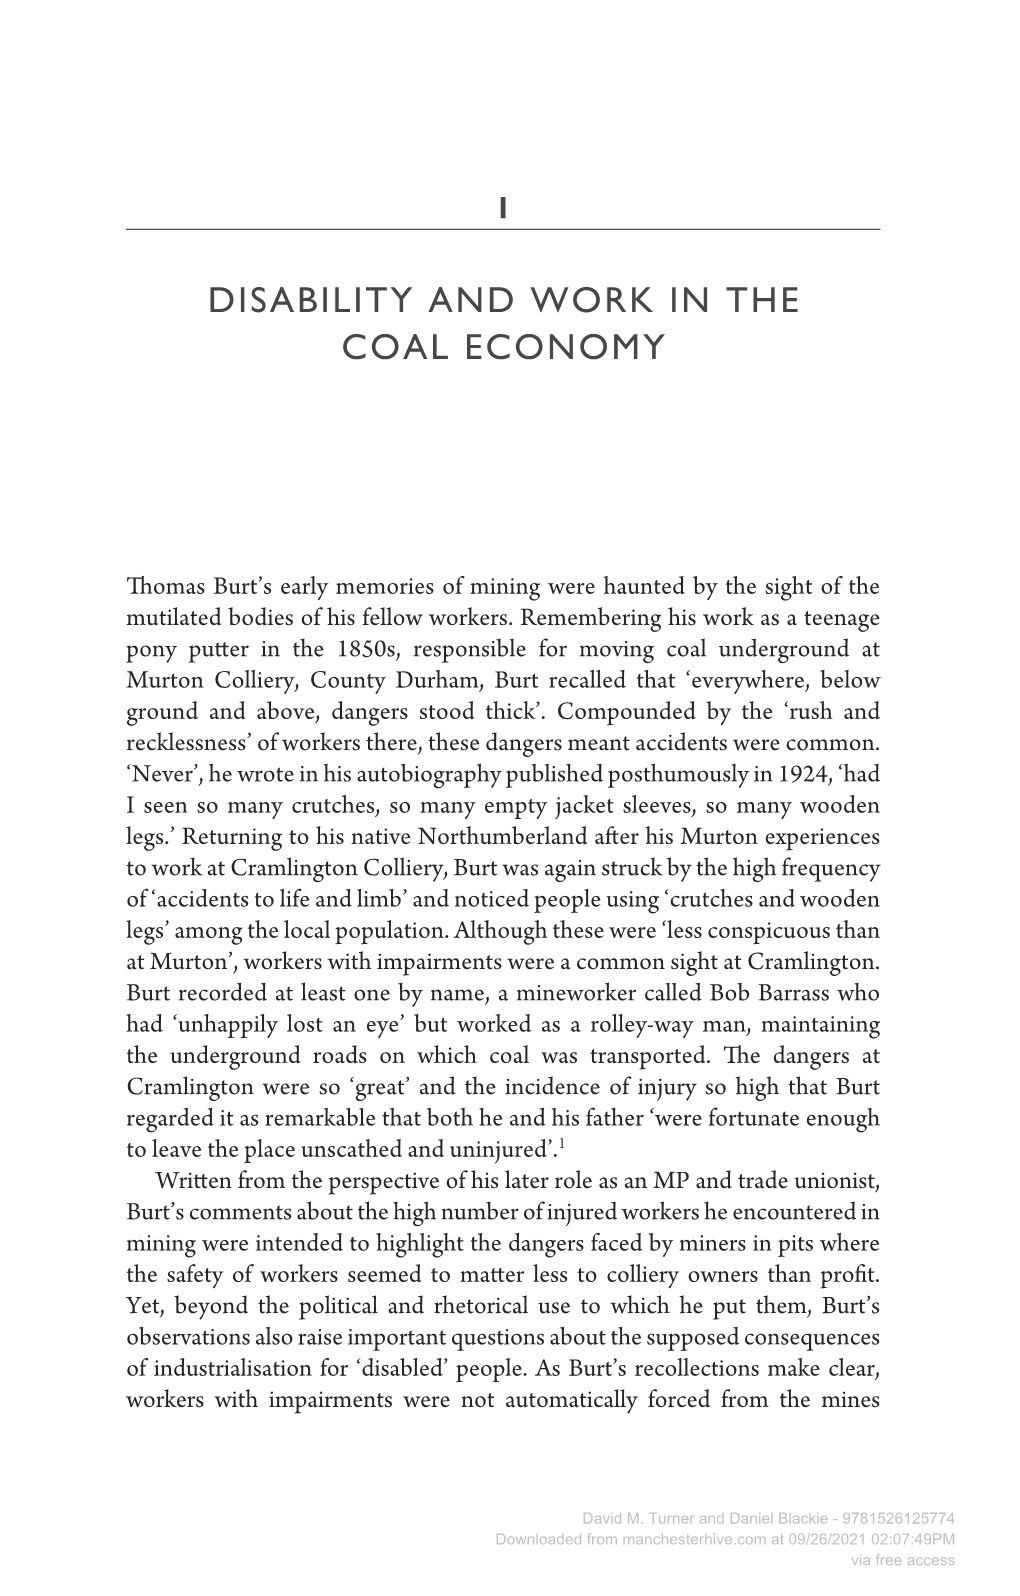 Disability and Work in the Coal Economy 23